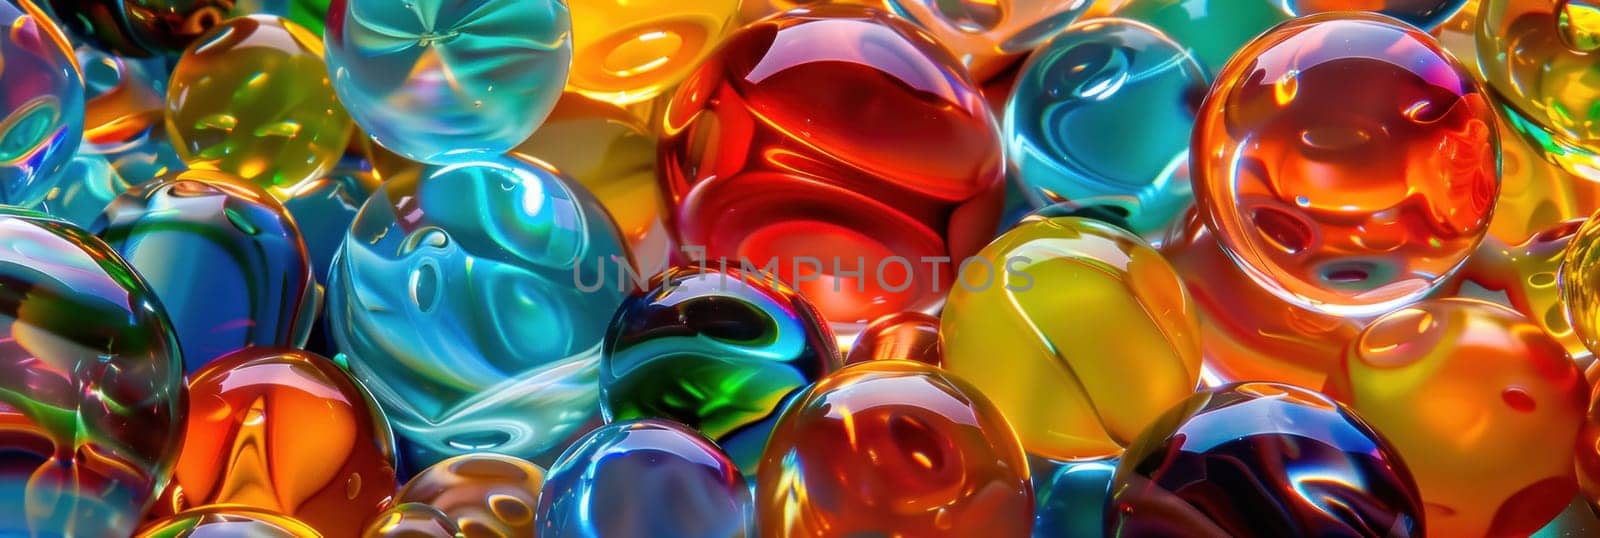 A colorful collection of marbles with a rainbow of colors. The marbles are arranged in a way that they appear to be floating in a pool of water. Concept of playfulness and joy